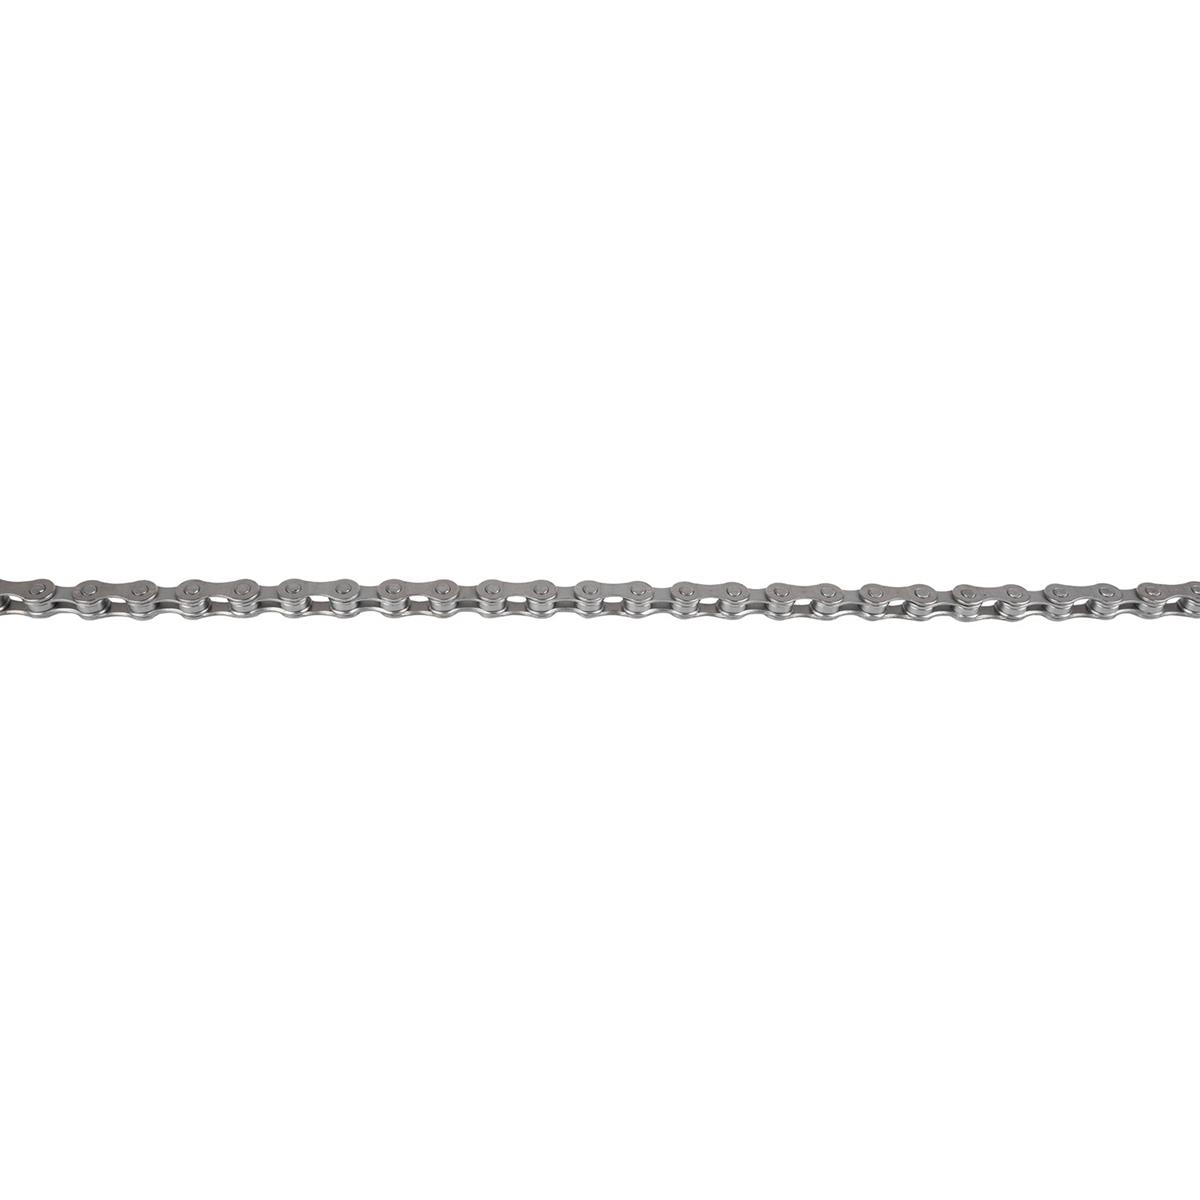 7/8s Chain With Anti-Rust Treatment s 116 Silver Links